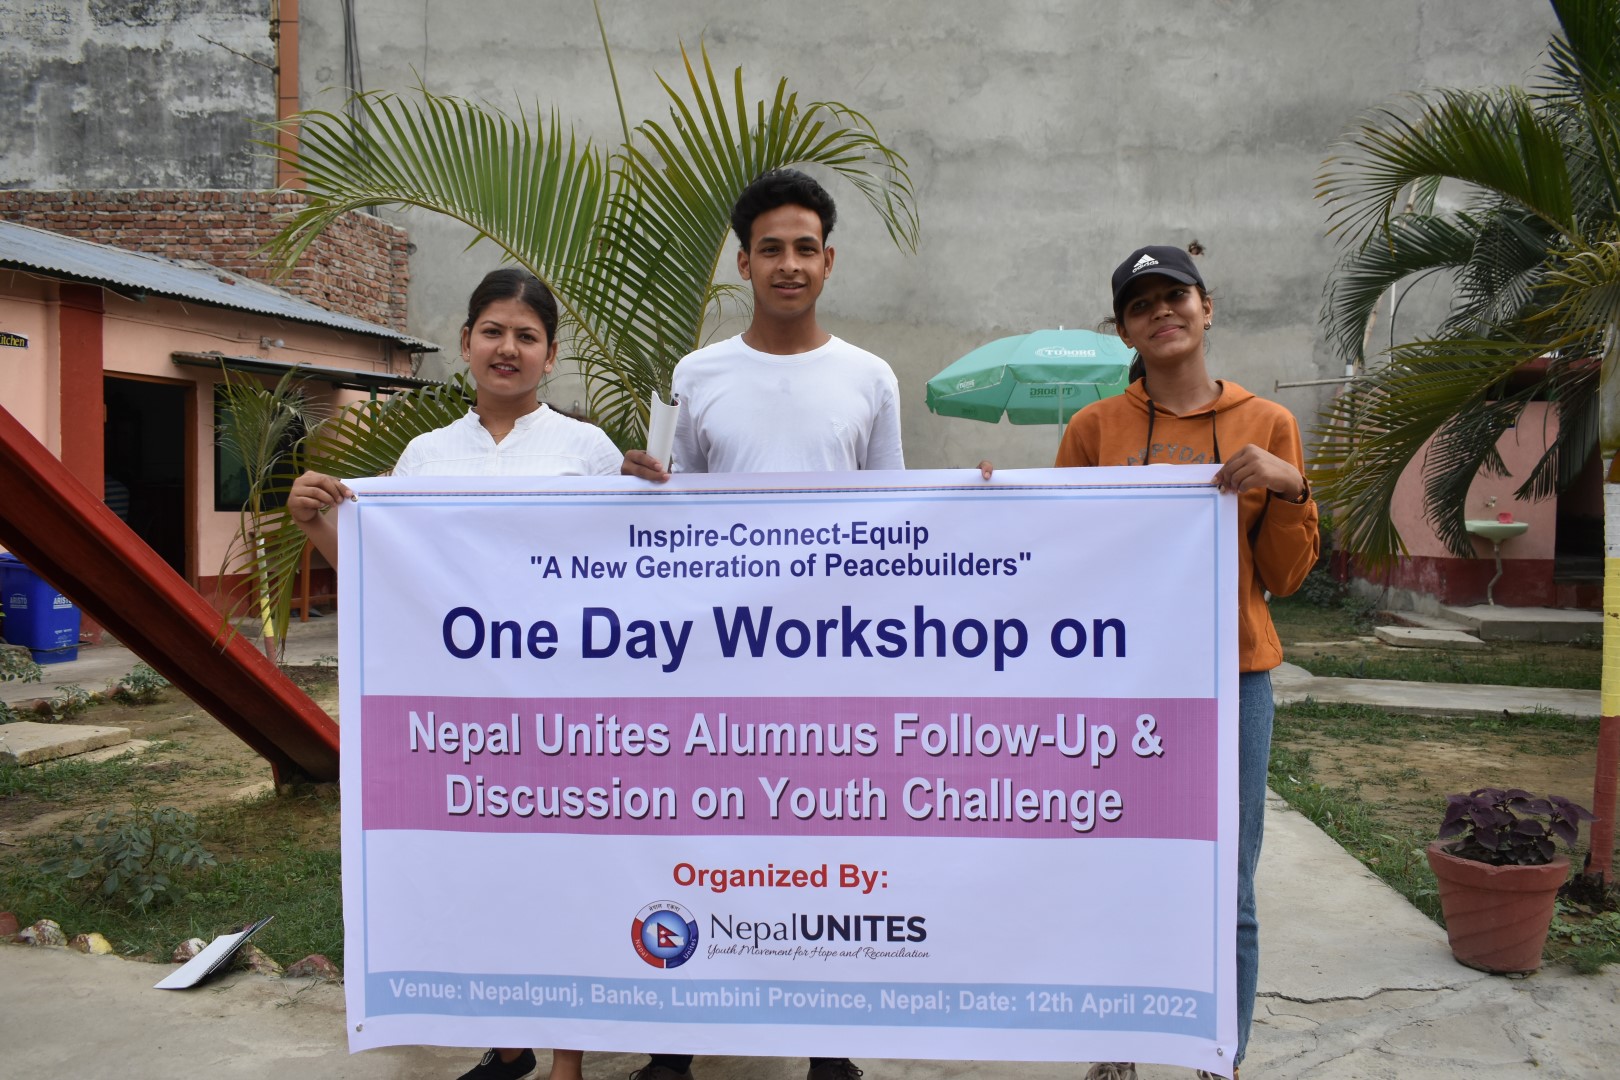 NU Alumnus Follow-Up Workshop & Discussion on Youth Challenge